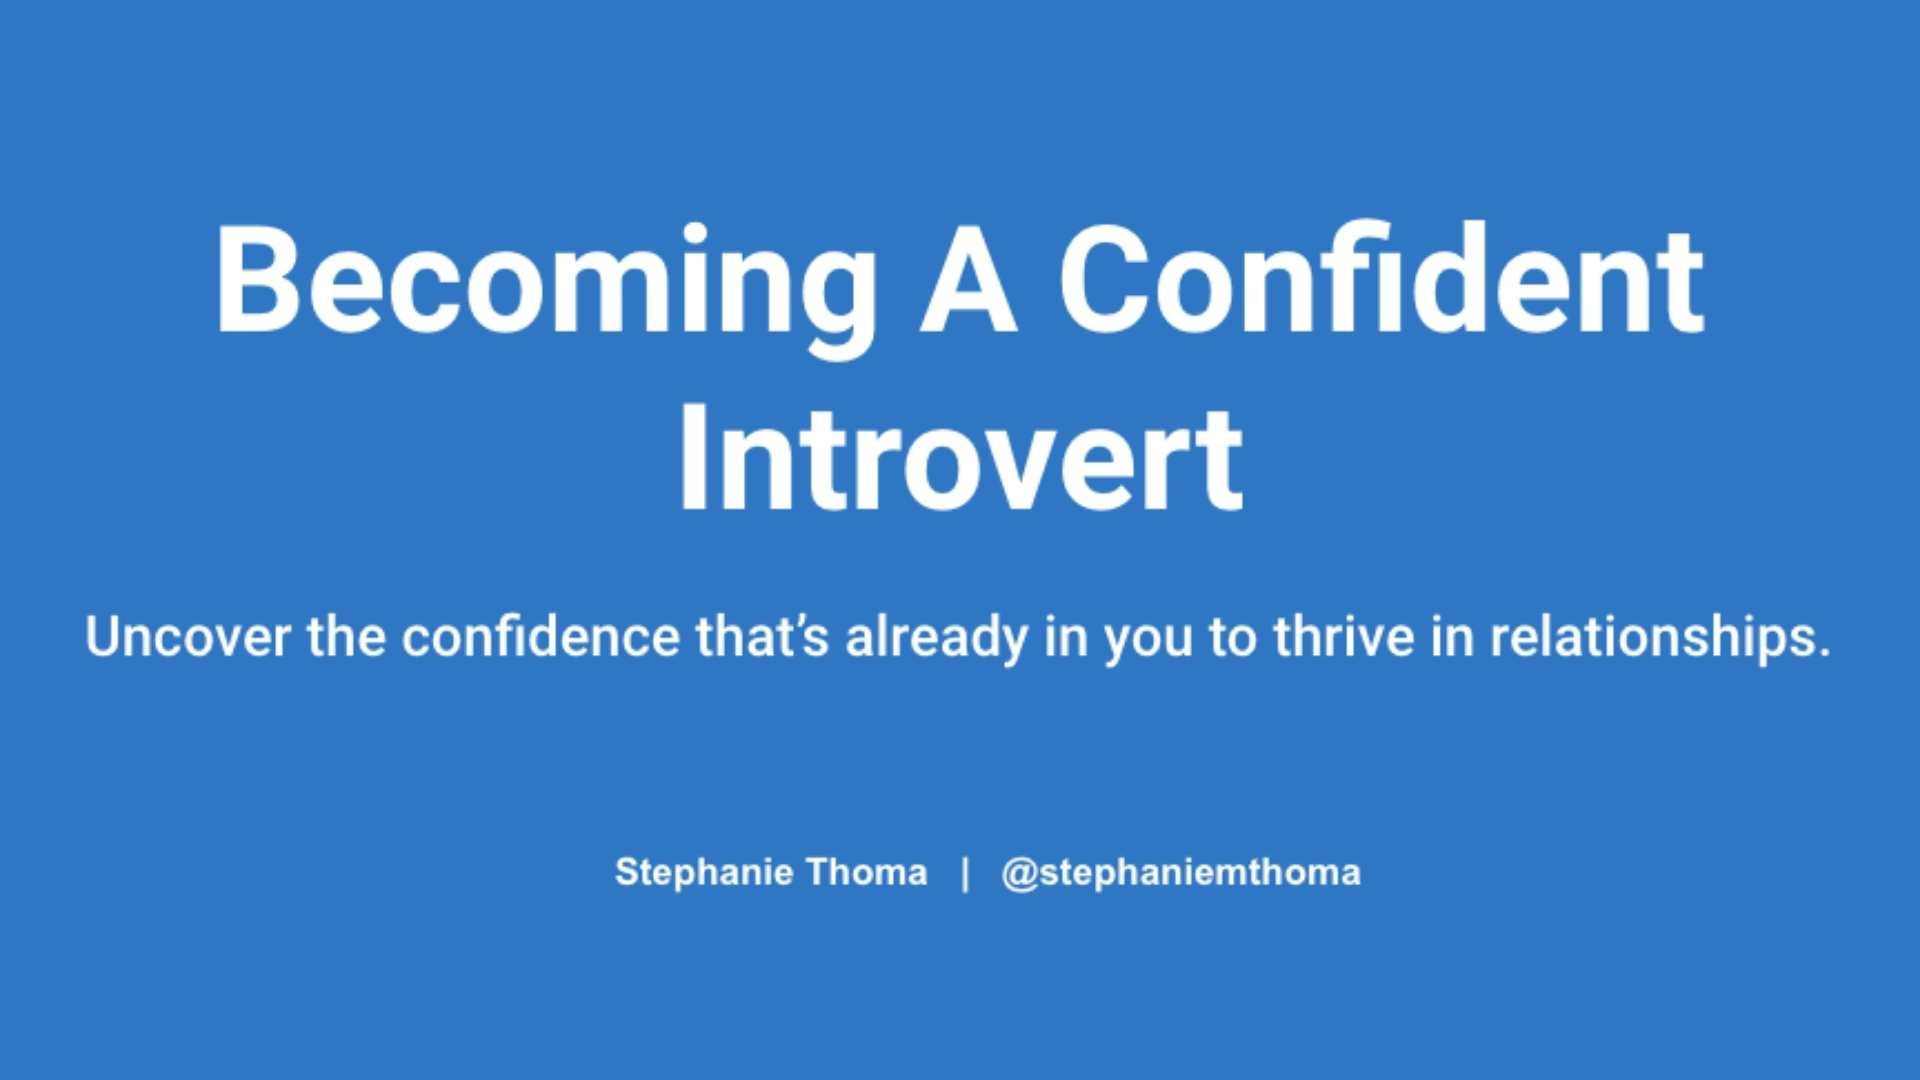 Becoming a confident introvert